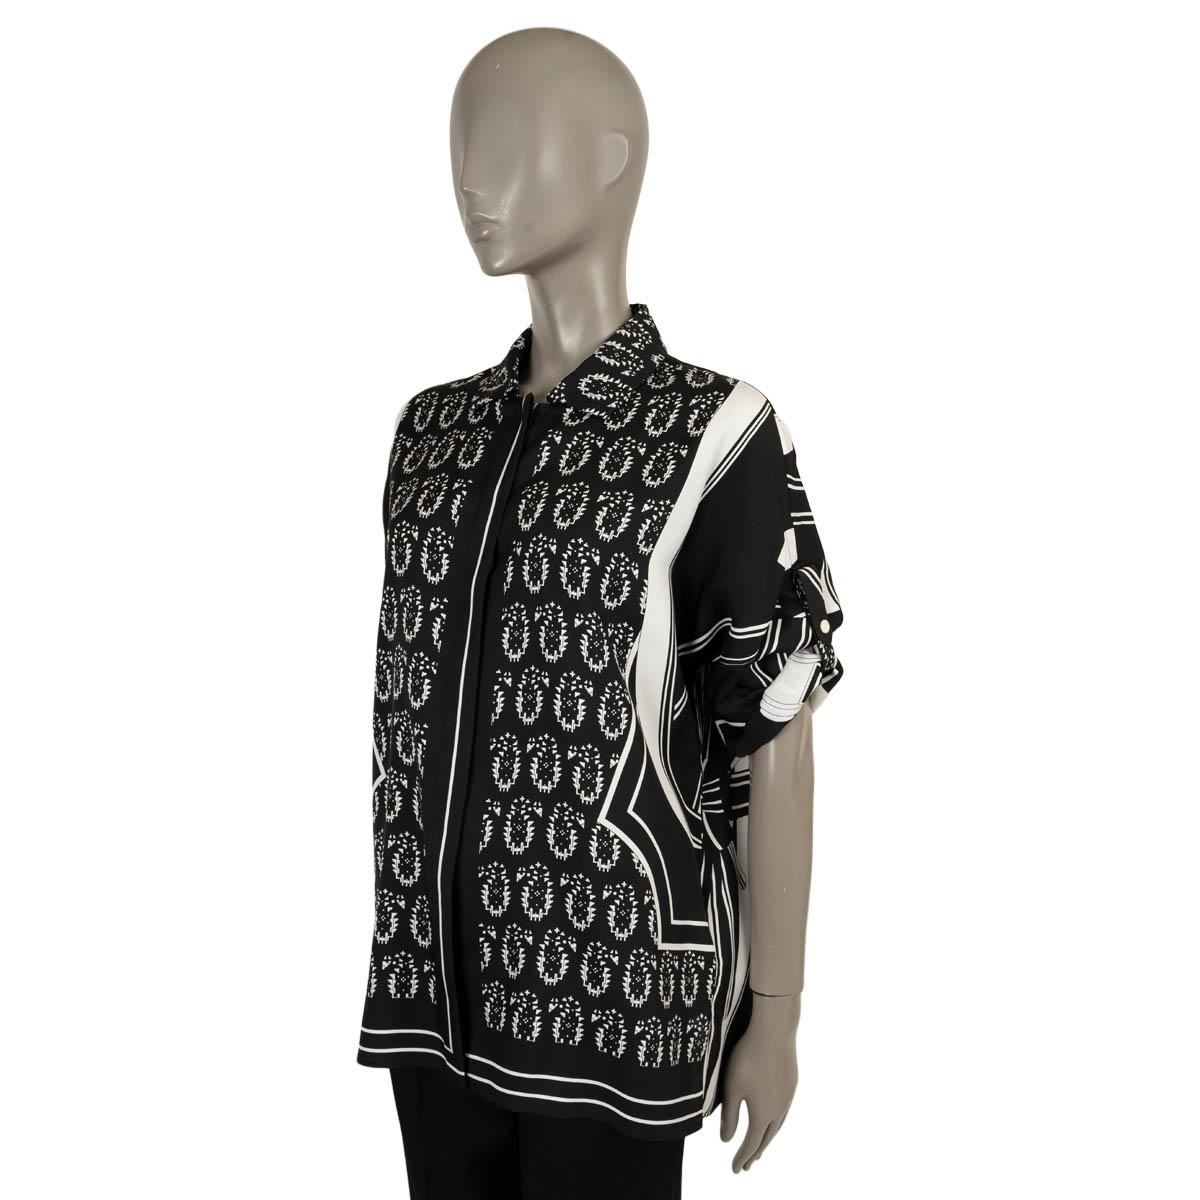 100% authentic Hermès blouse in black and white silk (100%) with Les Roues de Phaeton print. Closes with concealed buttons on the front. Has been worn and is in excellent condition.

Complete the look with matching blouse available in separate